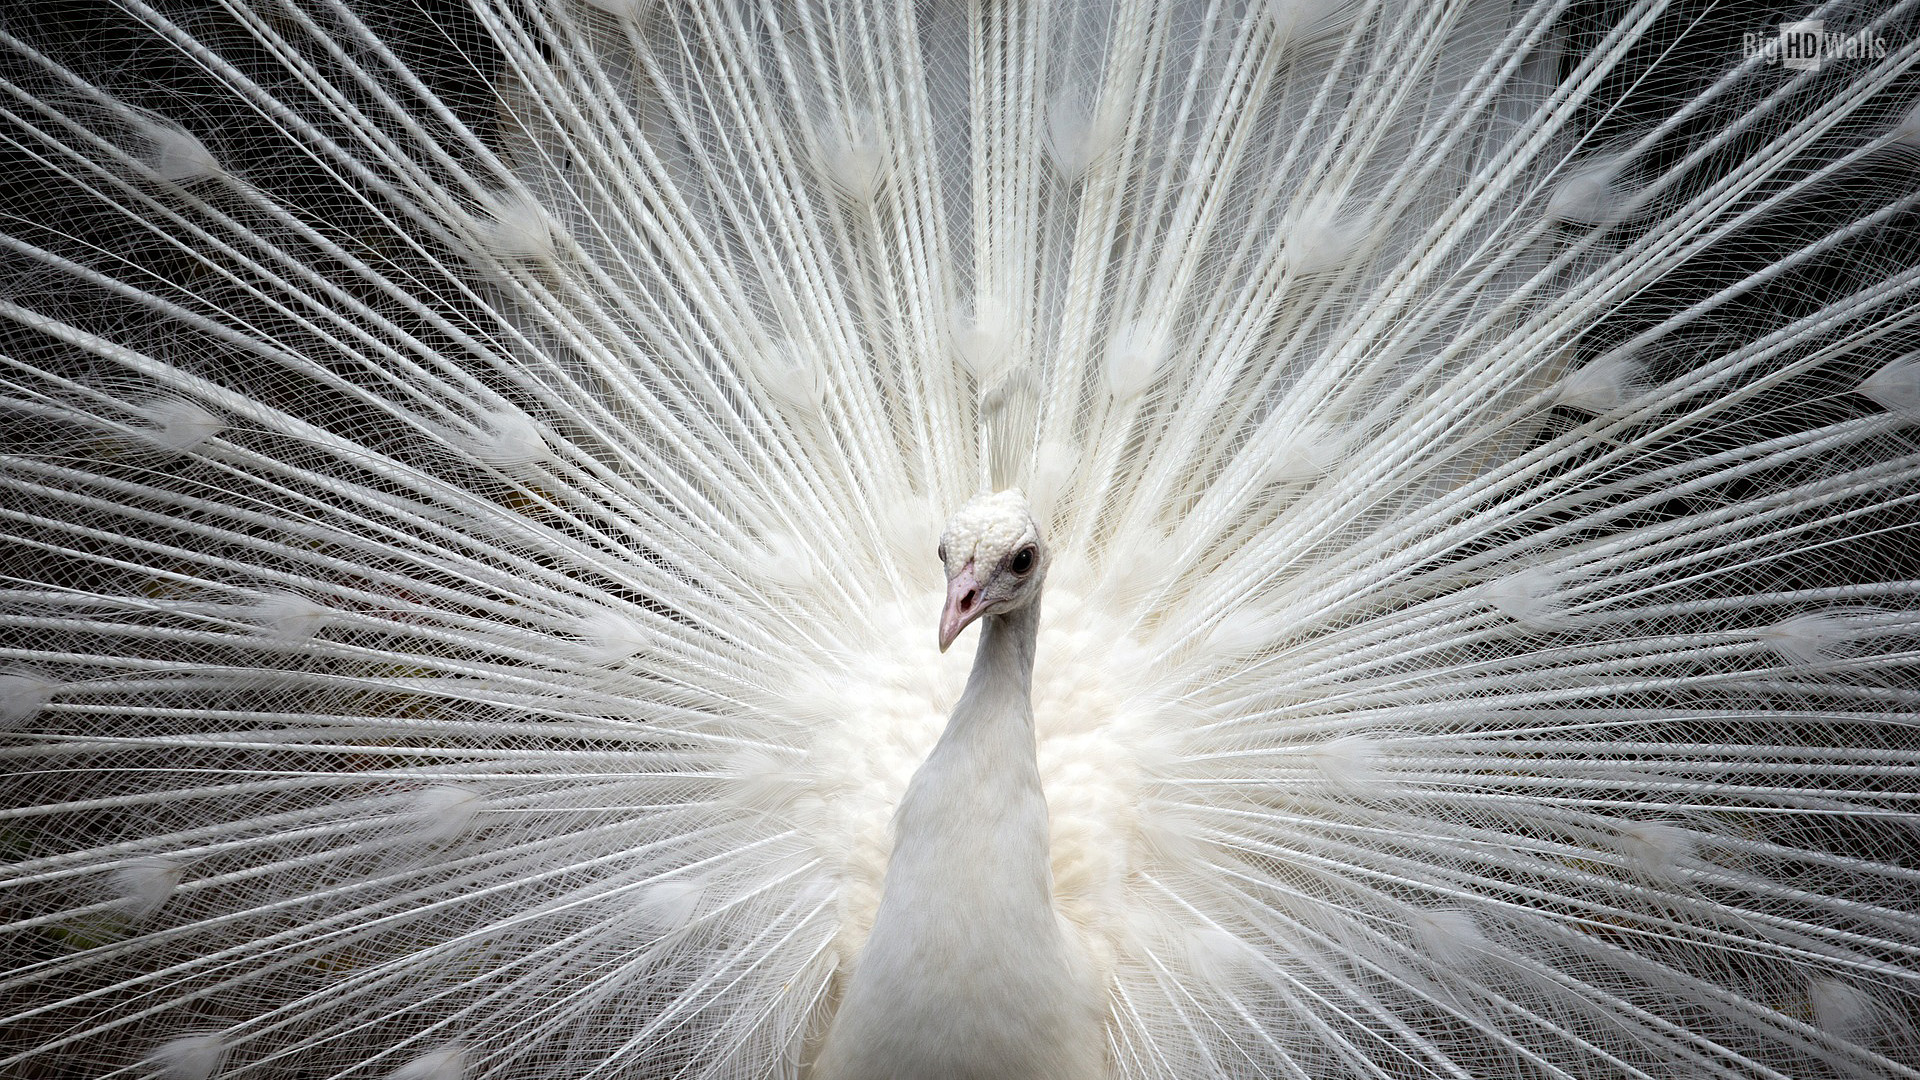 White Peacock Wallpaper For Iphone On Wallpaper 1080p - White Peacock Wallpaper Desktop , HD Wallpaper & Backgrounds